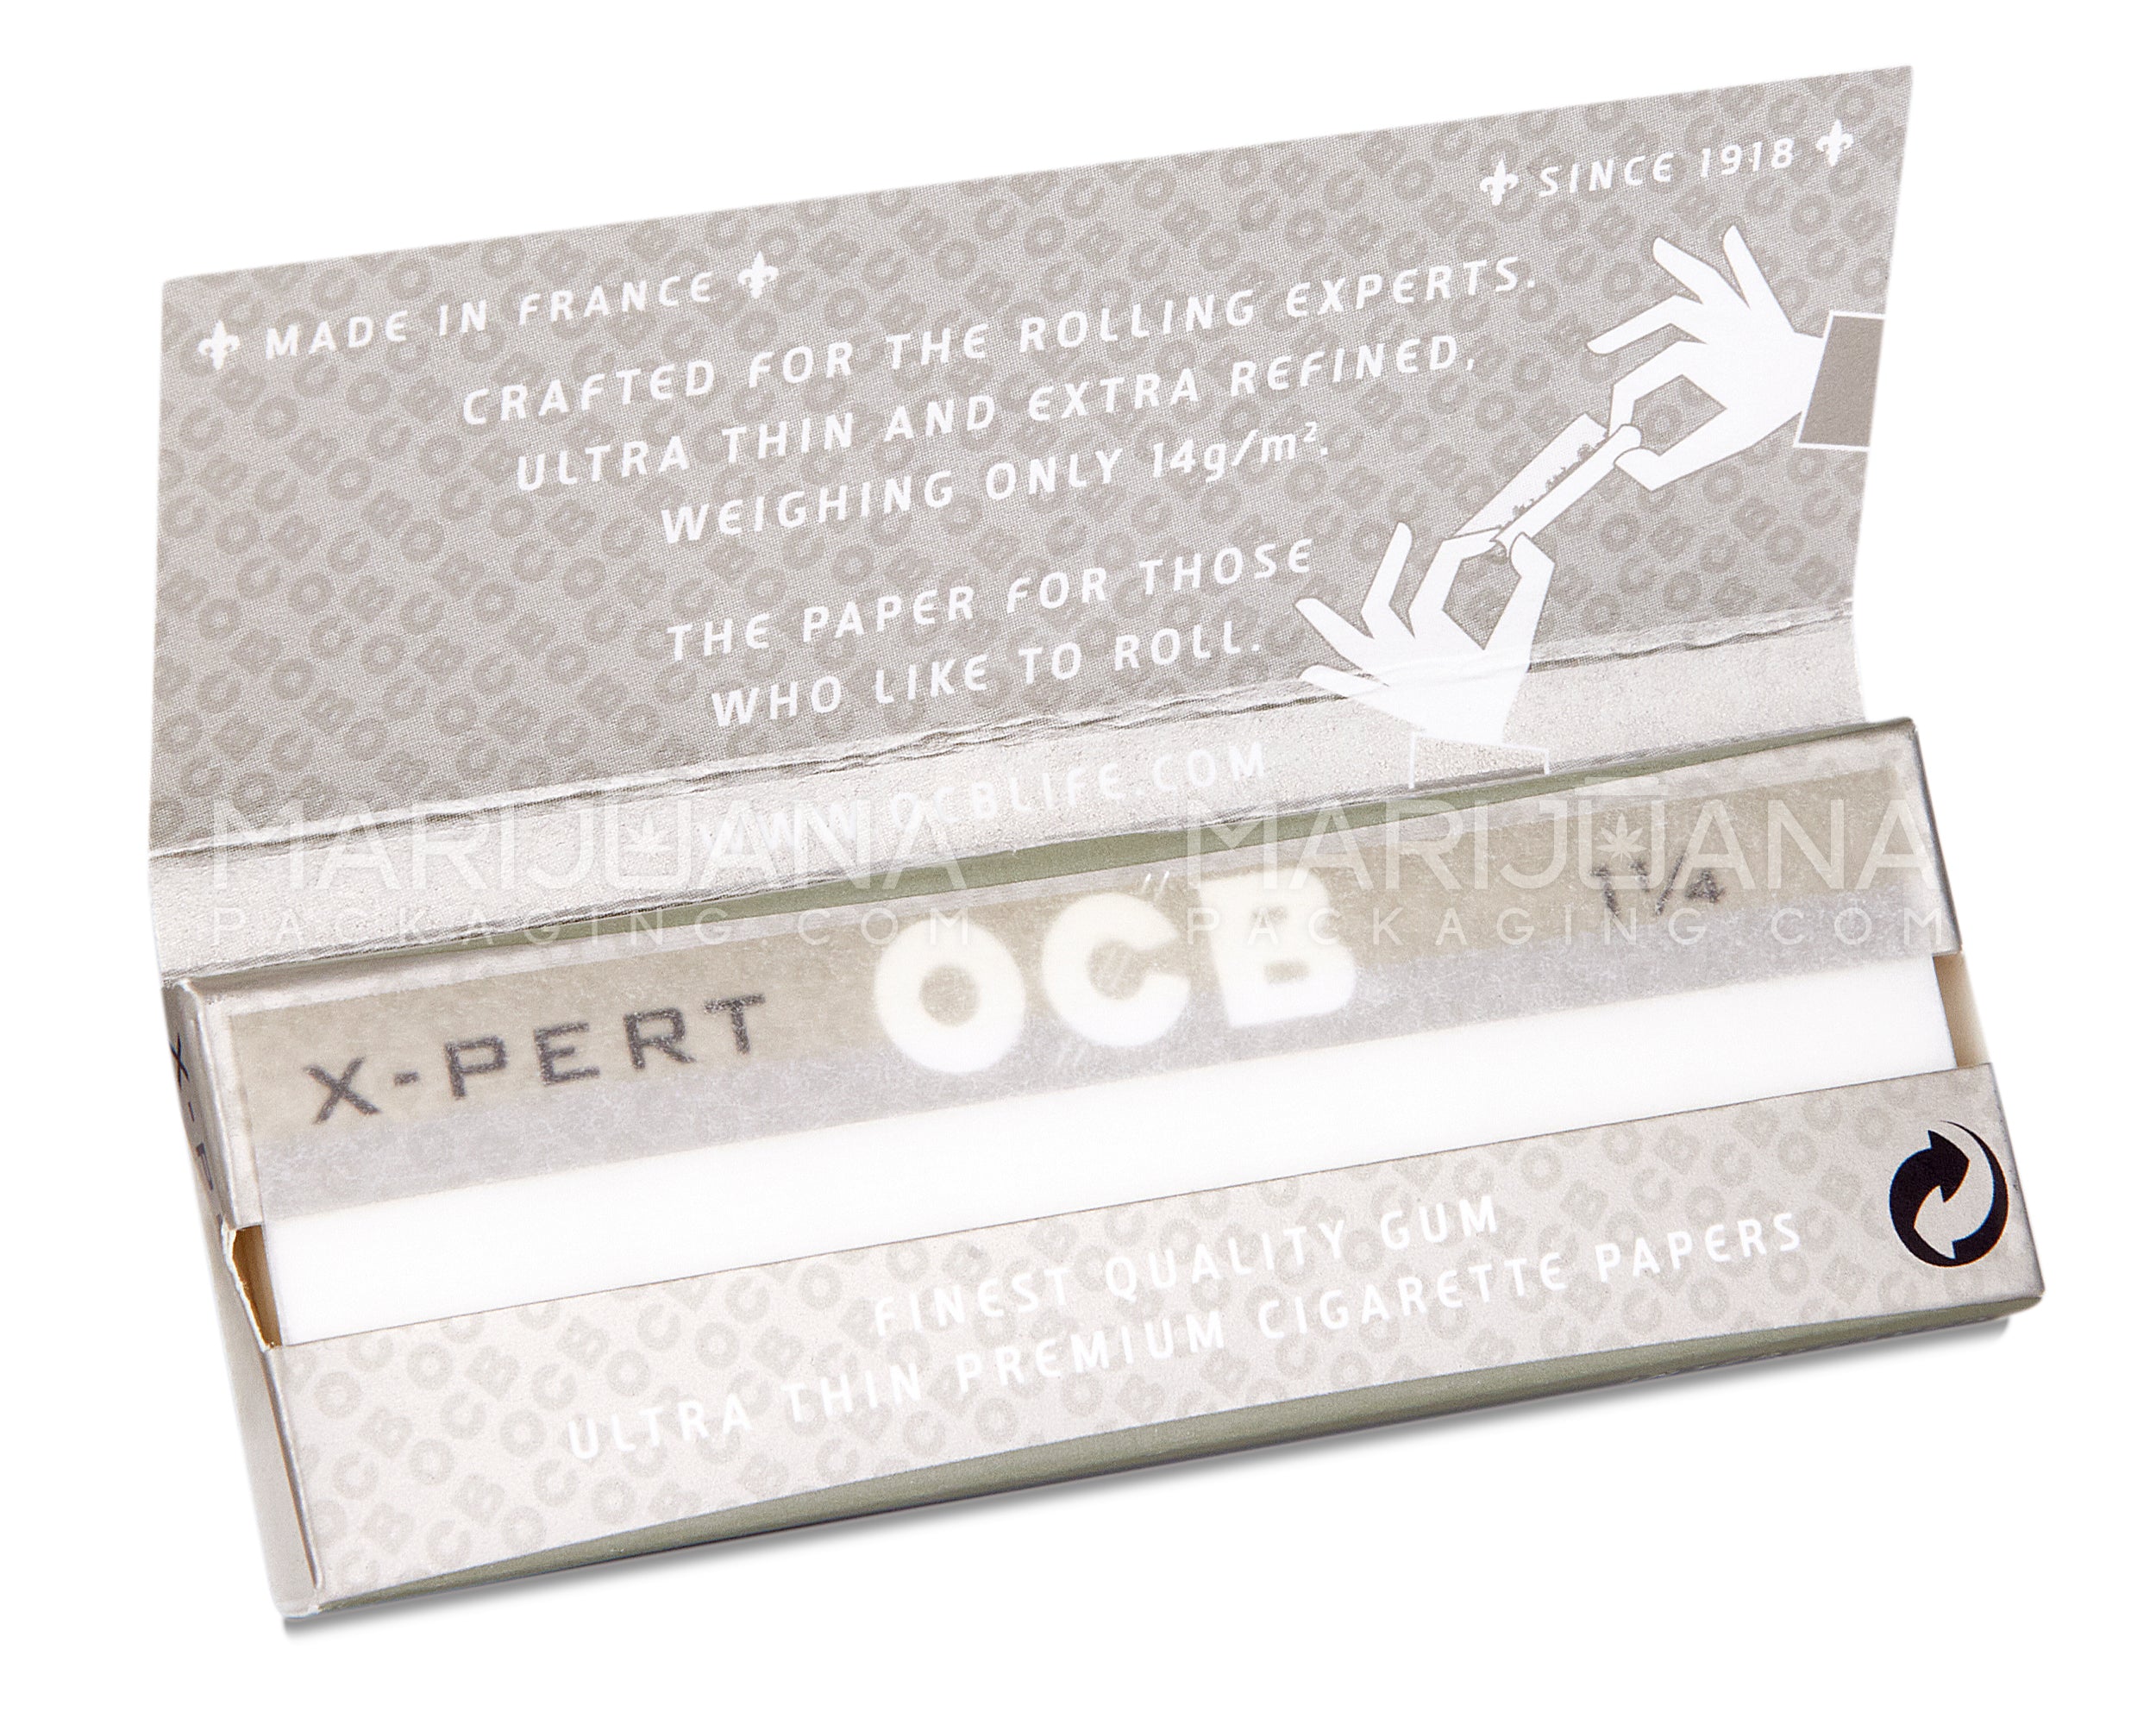 OCB | 'Retail Display' 1 1/4 Size Rolling Papers | 76mm - X Pert - 24 Count - 5